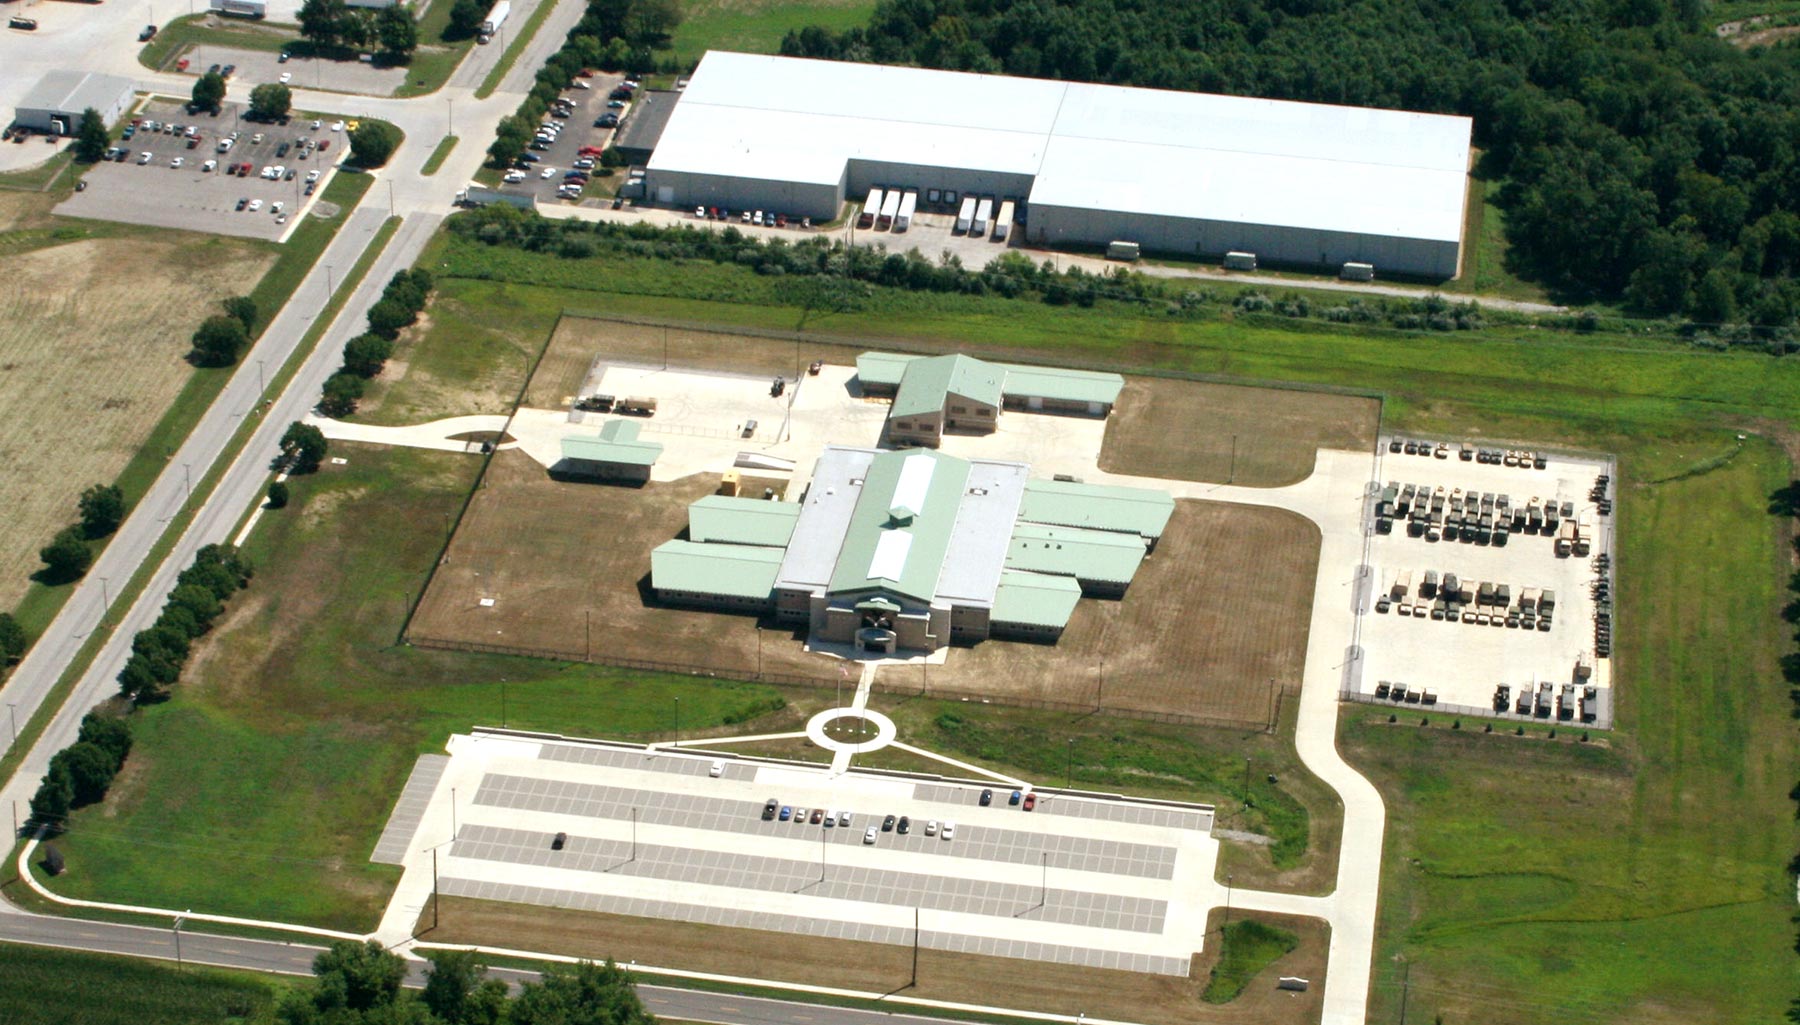 Exterior View of The Armed Forces Reserve Center in Mount Vernon, Illinois